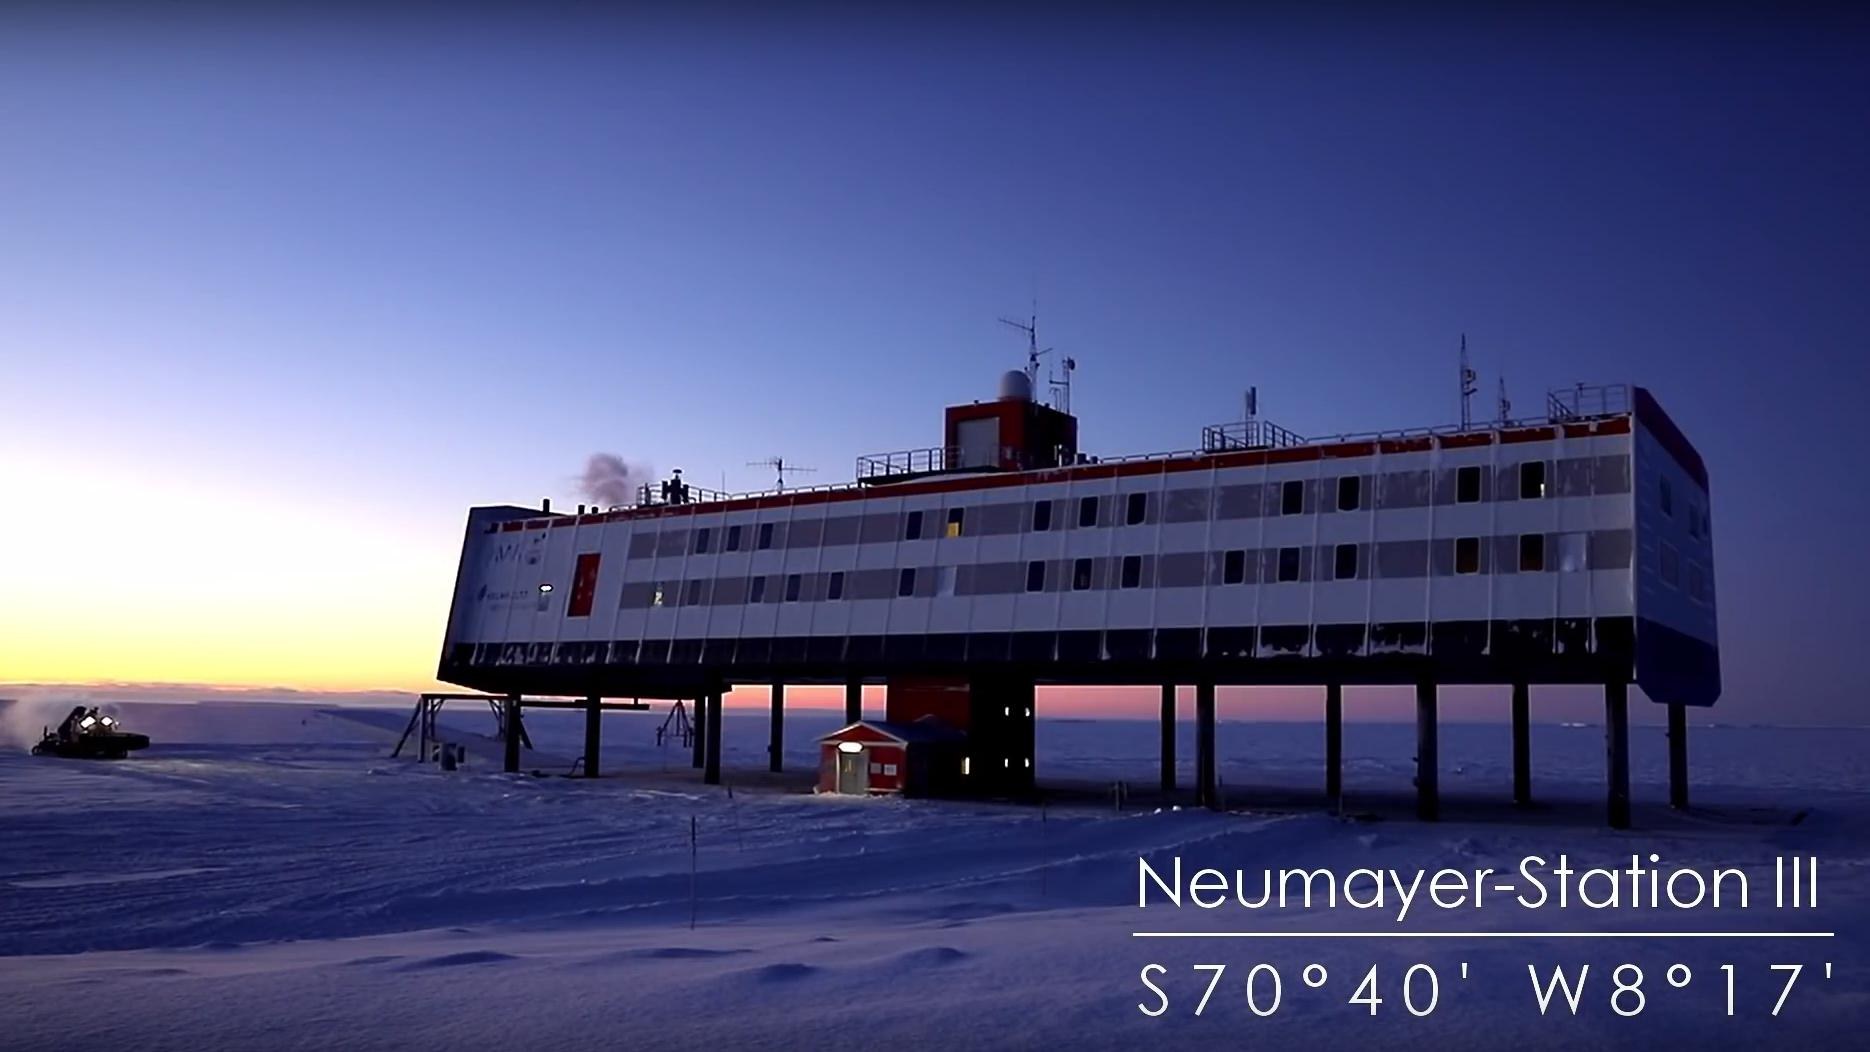 Video still - Midwinter greetings 2018 from Neumayer Station III